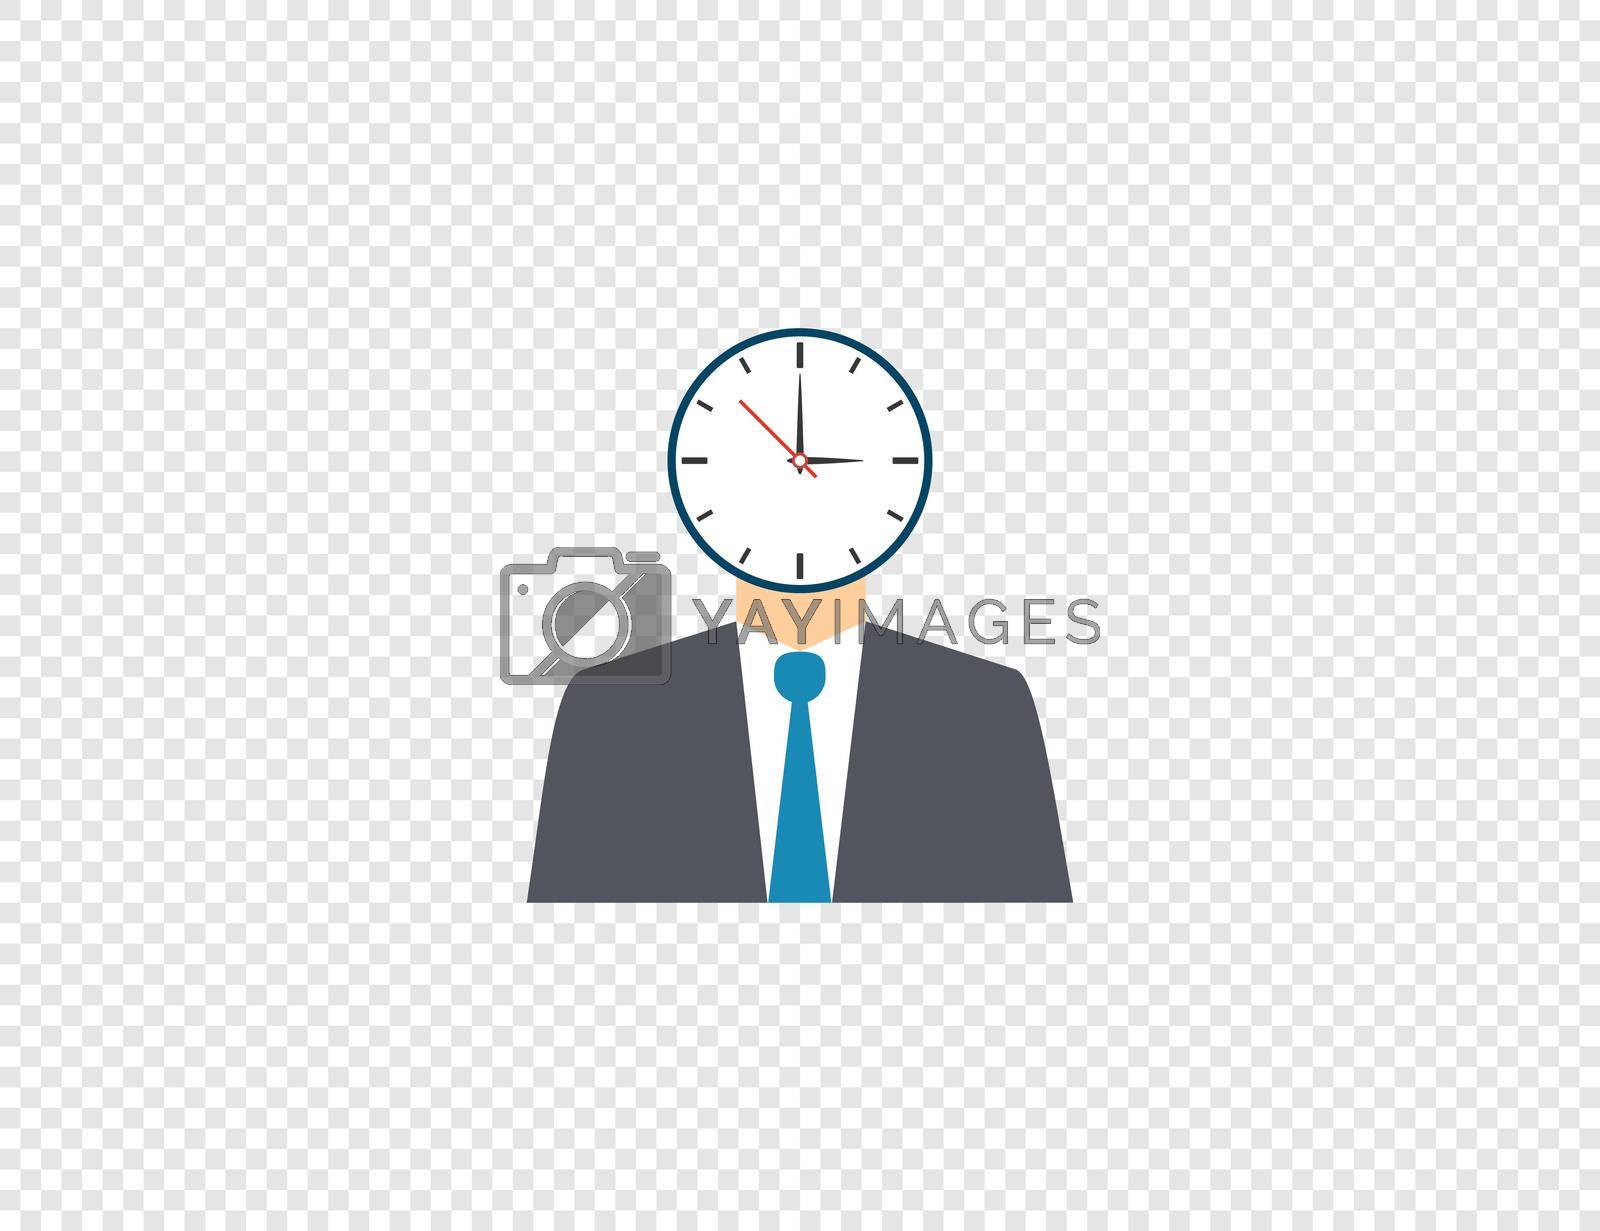 Royalty free image of Clock, time management icon. Vector illustration. Flat design. by Vertyb